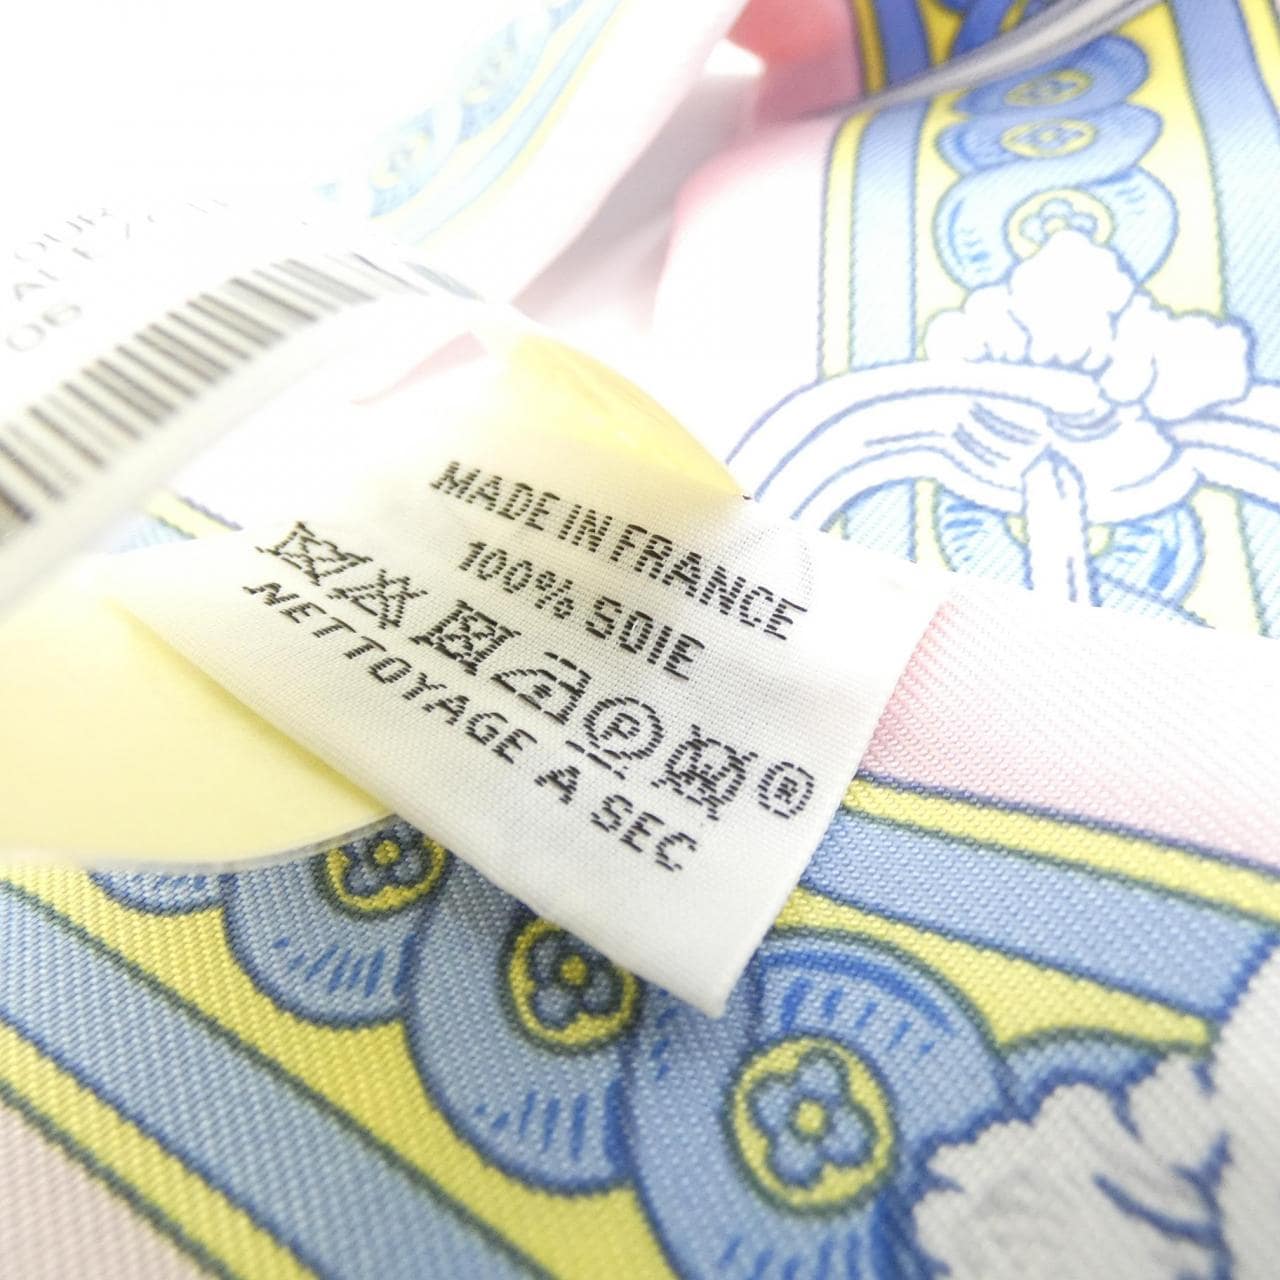 [Unused items] HERMES BRIDE DE COUR Twilly 061517S Scarf